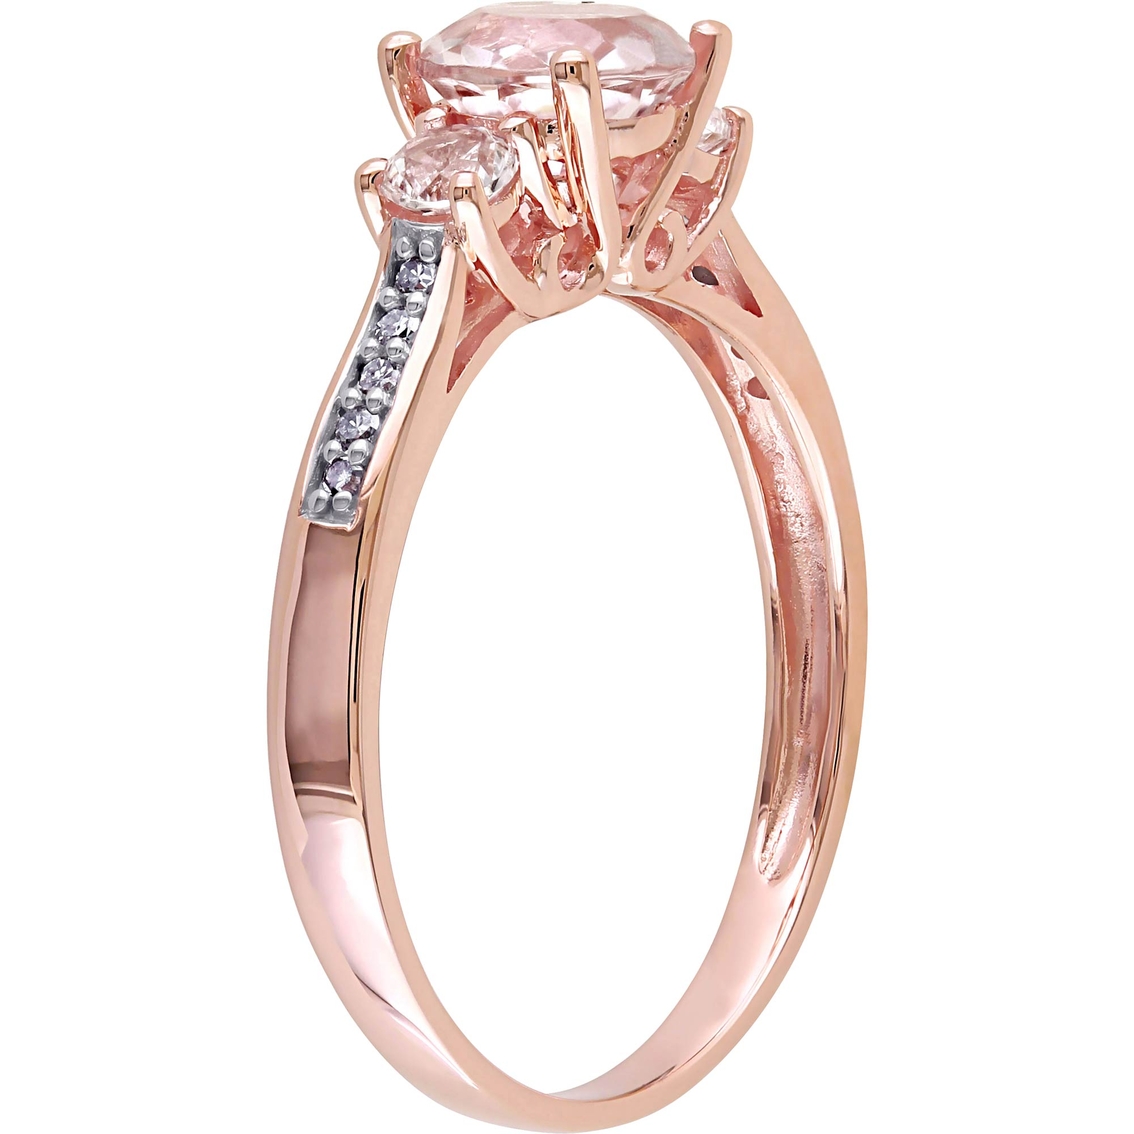 Sofia B. 10K Rose Gold Morganite Ring with Diamond Accents - Image 2 of 3